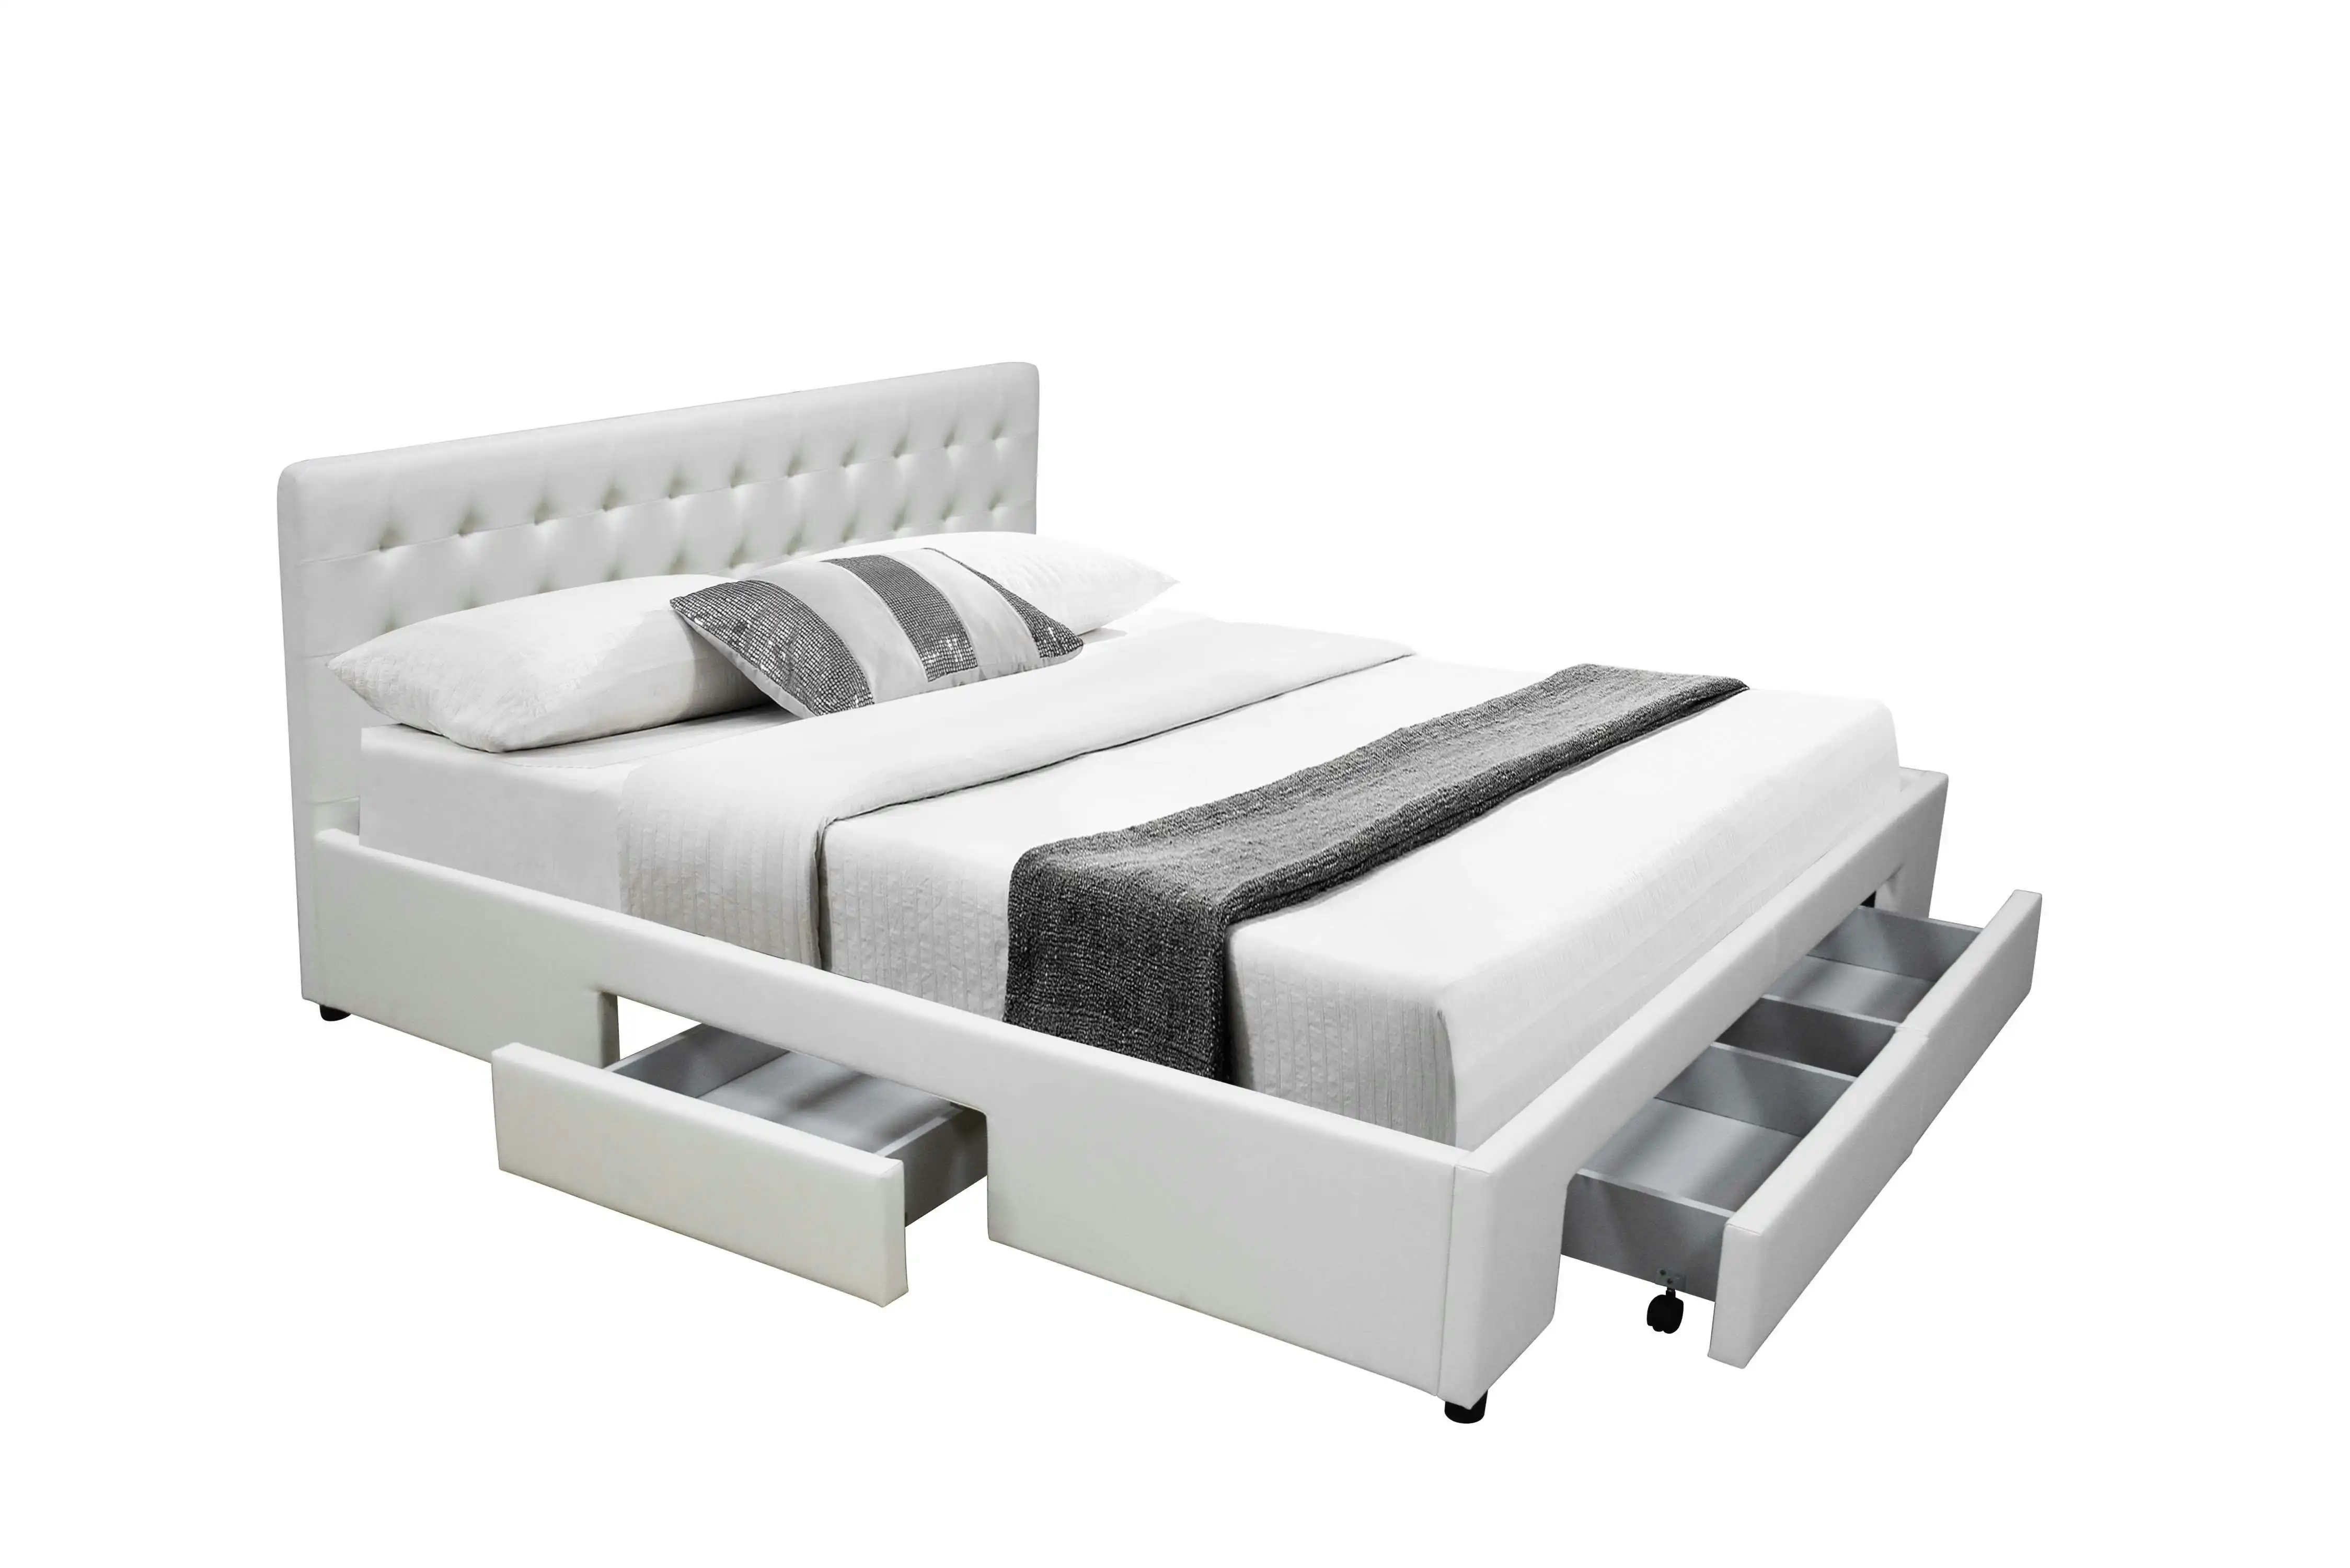 Julie PU Leather Queen Bed with Drawers - White